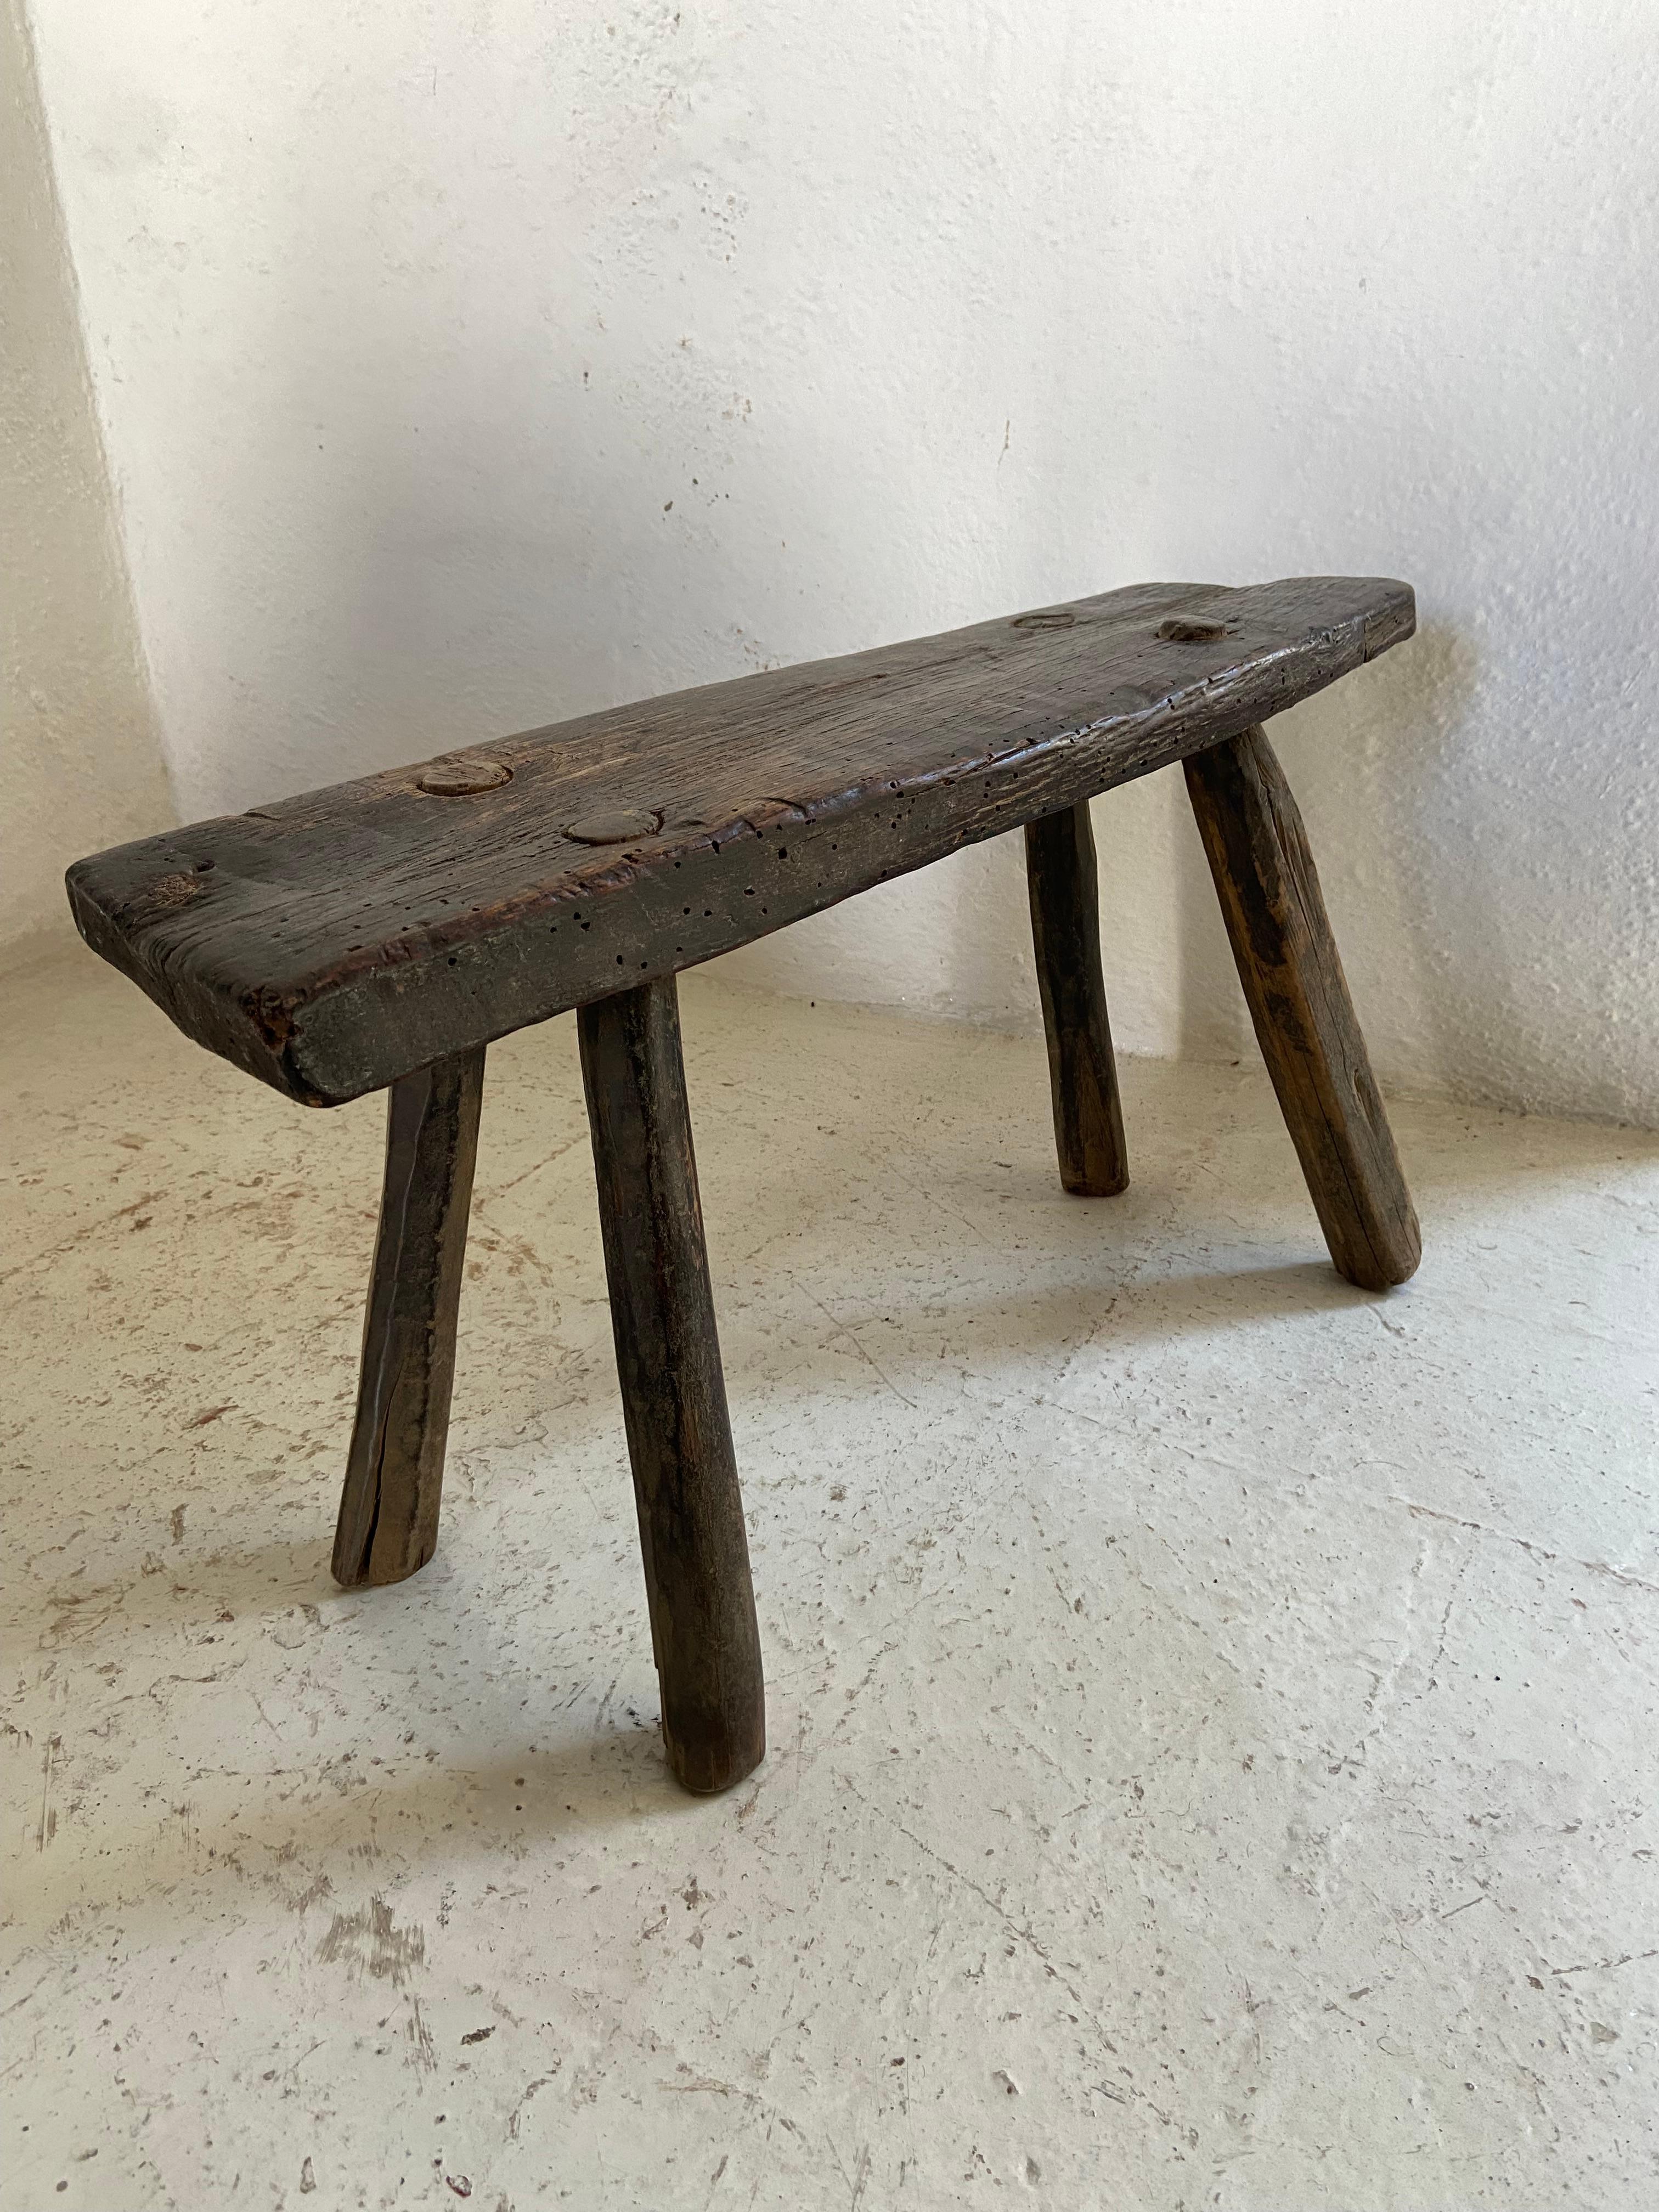 Primitive Hardwood Stool by Artefakto
Unique piece.
Dimensions: D 16 x W 55 x H 28 cm.
Materials: Hardwood.
Guanajuato, Mexico 1950 ´s.

Artefakto opened its doors on the Riviera Nayarit coastline in 2010. With an unrelenting passion for all